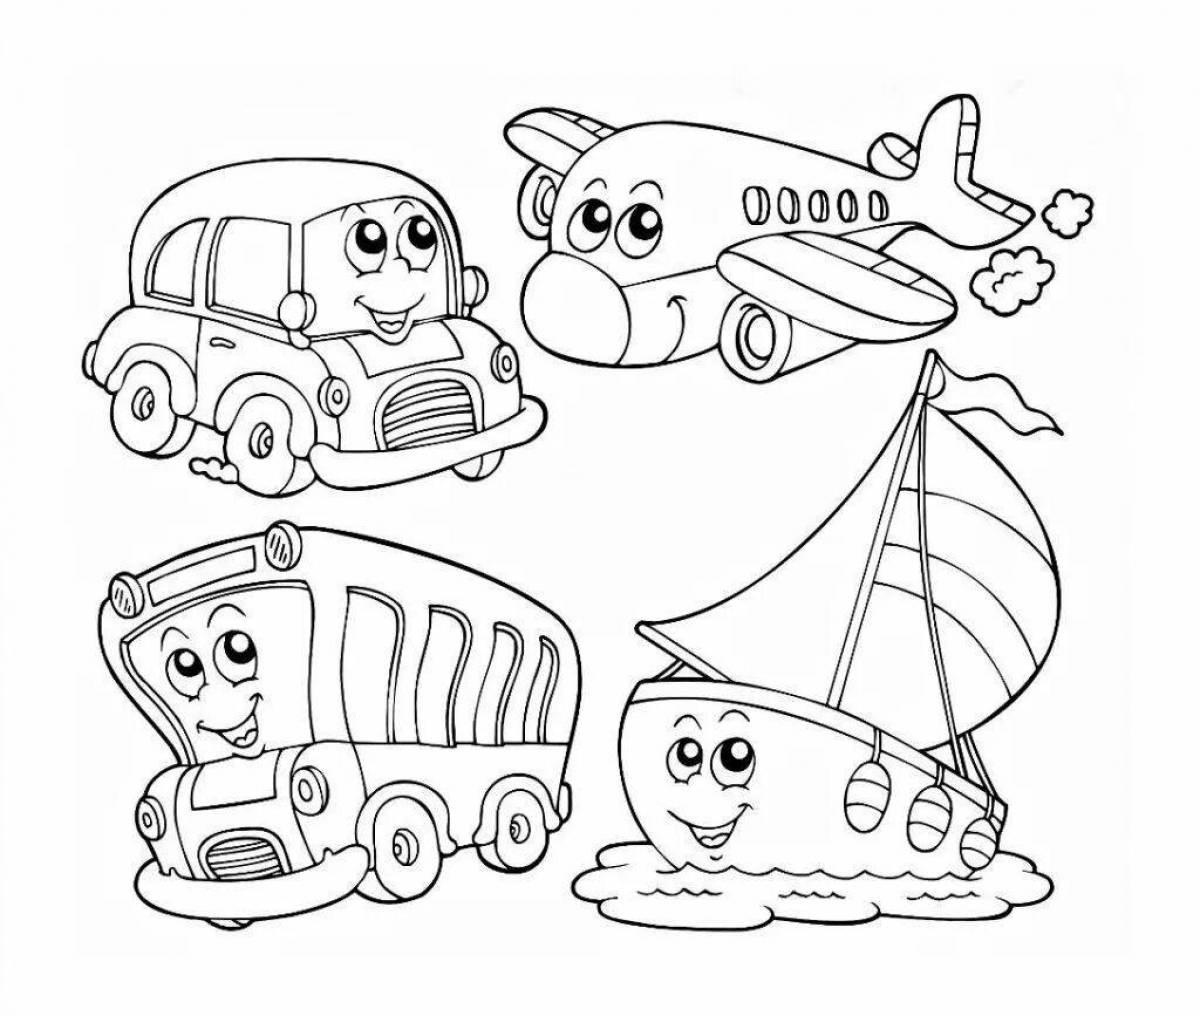 Color-joyful coloring page 2 for boys